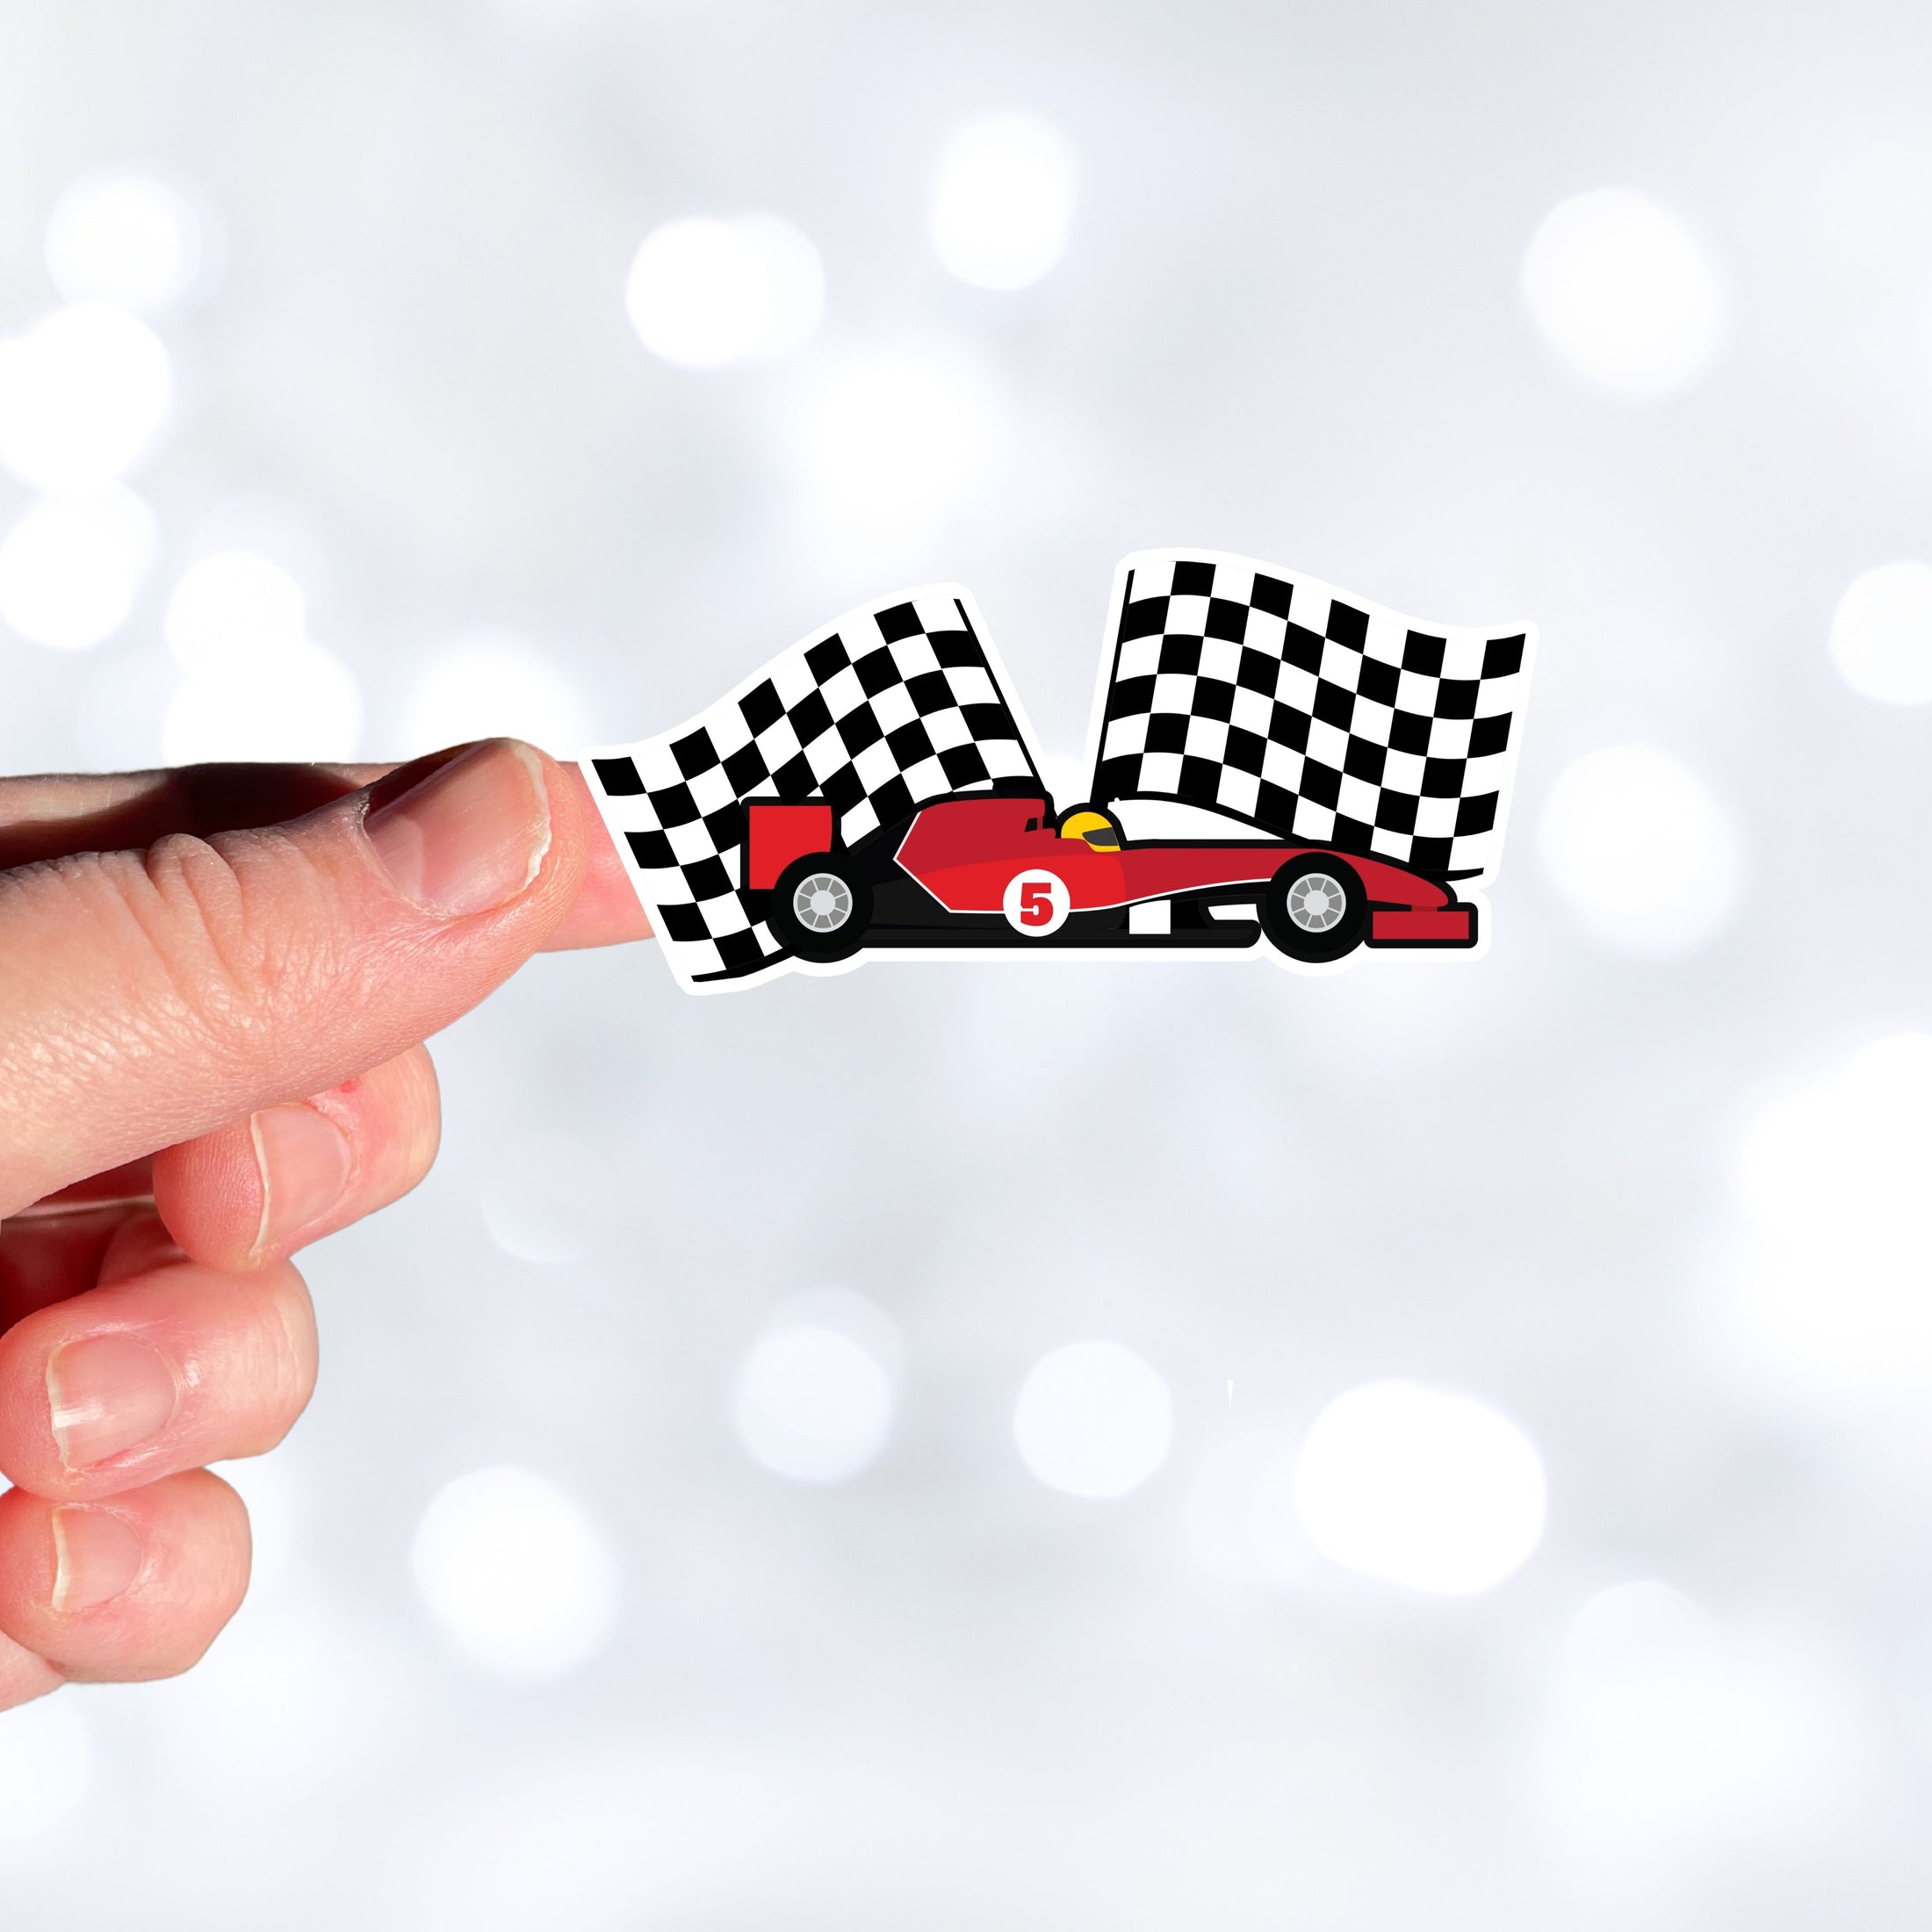 This image shows a hand holding the race car with flags sticker.